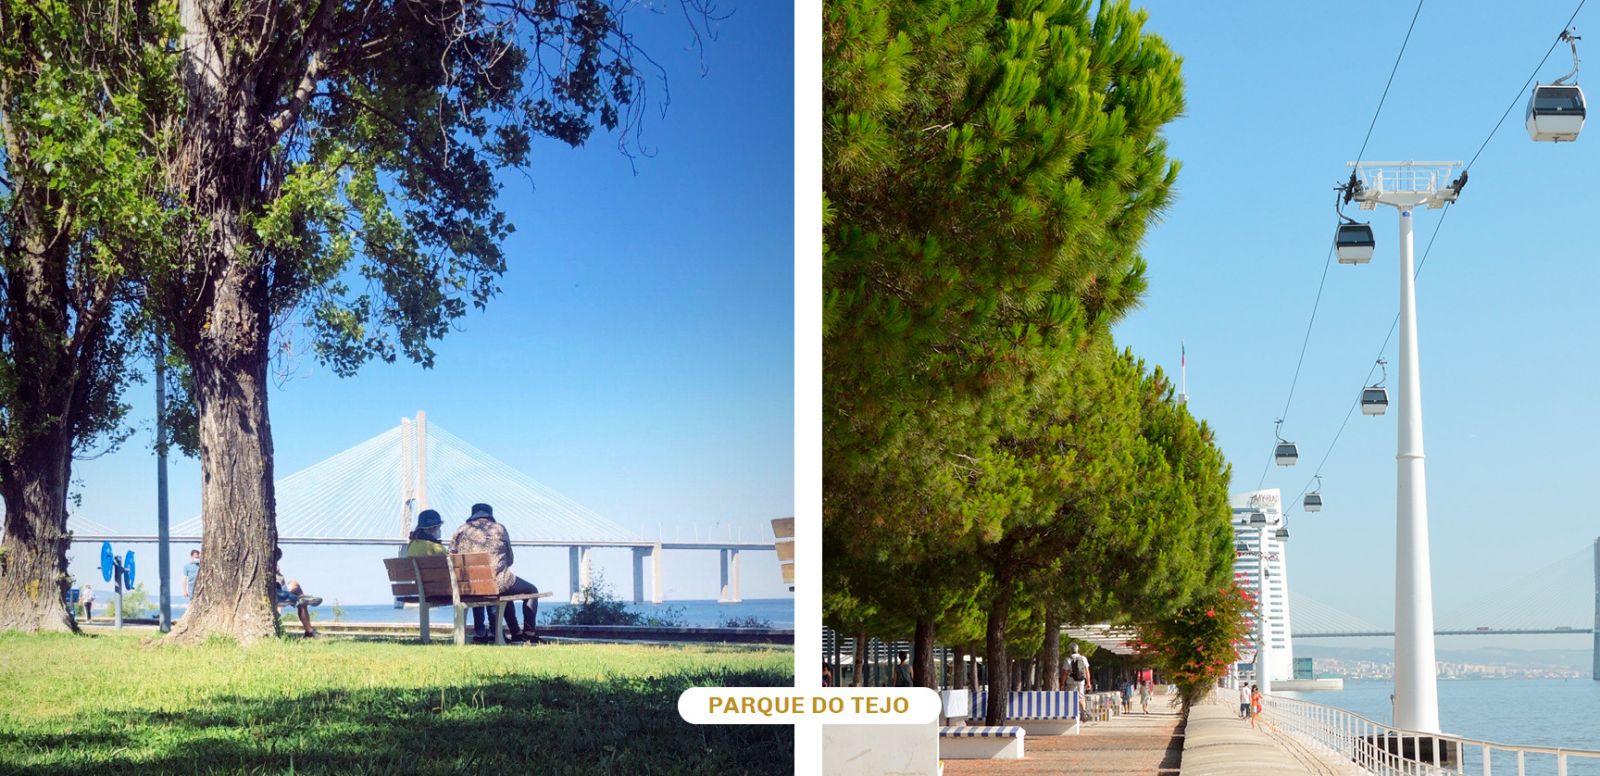 Parque do Tejo is a great riverside park to chill in Lisbon.